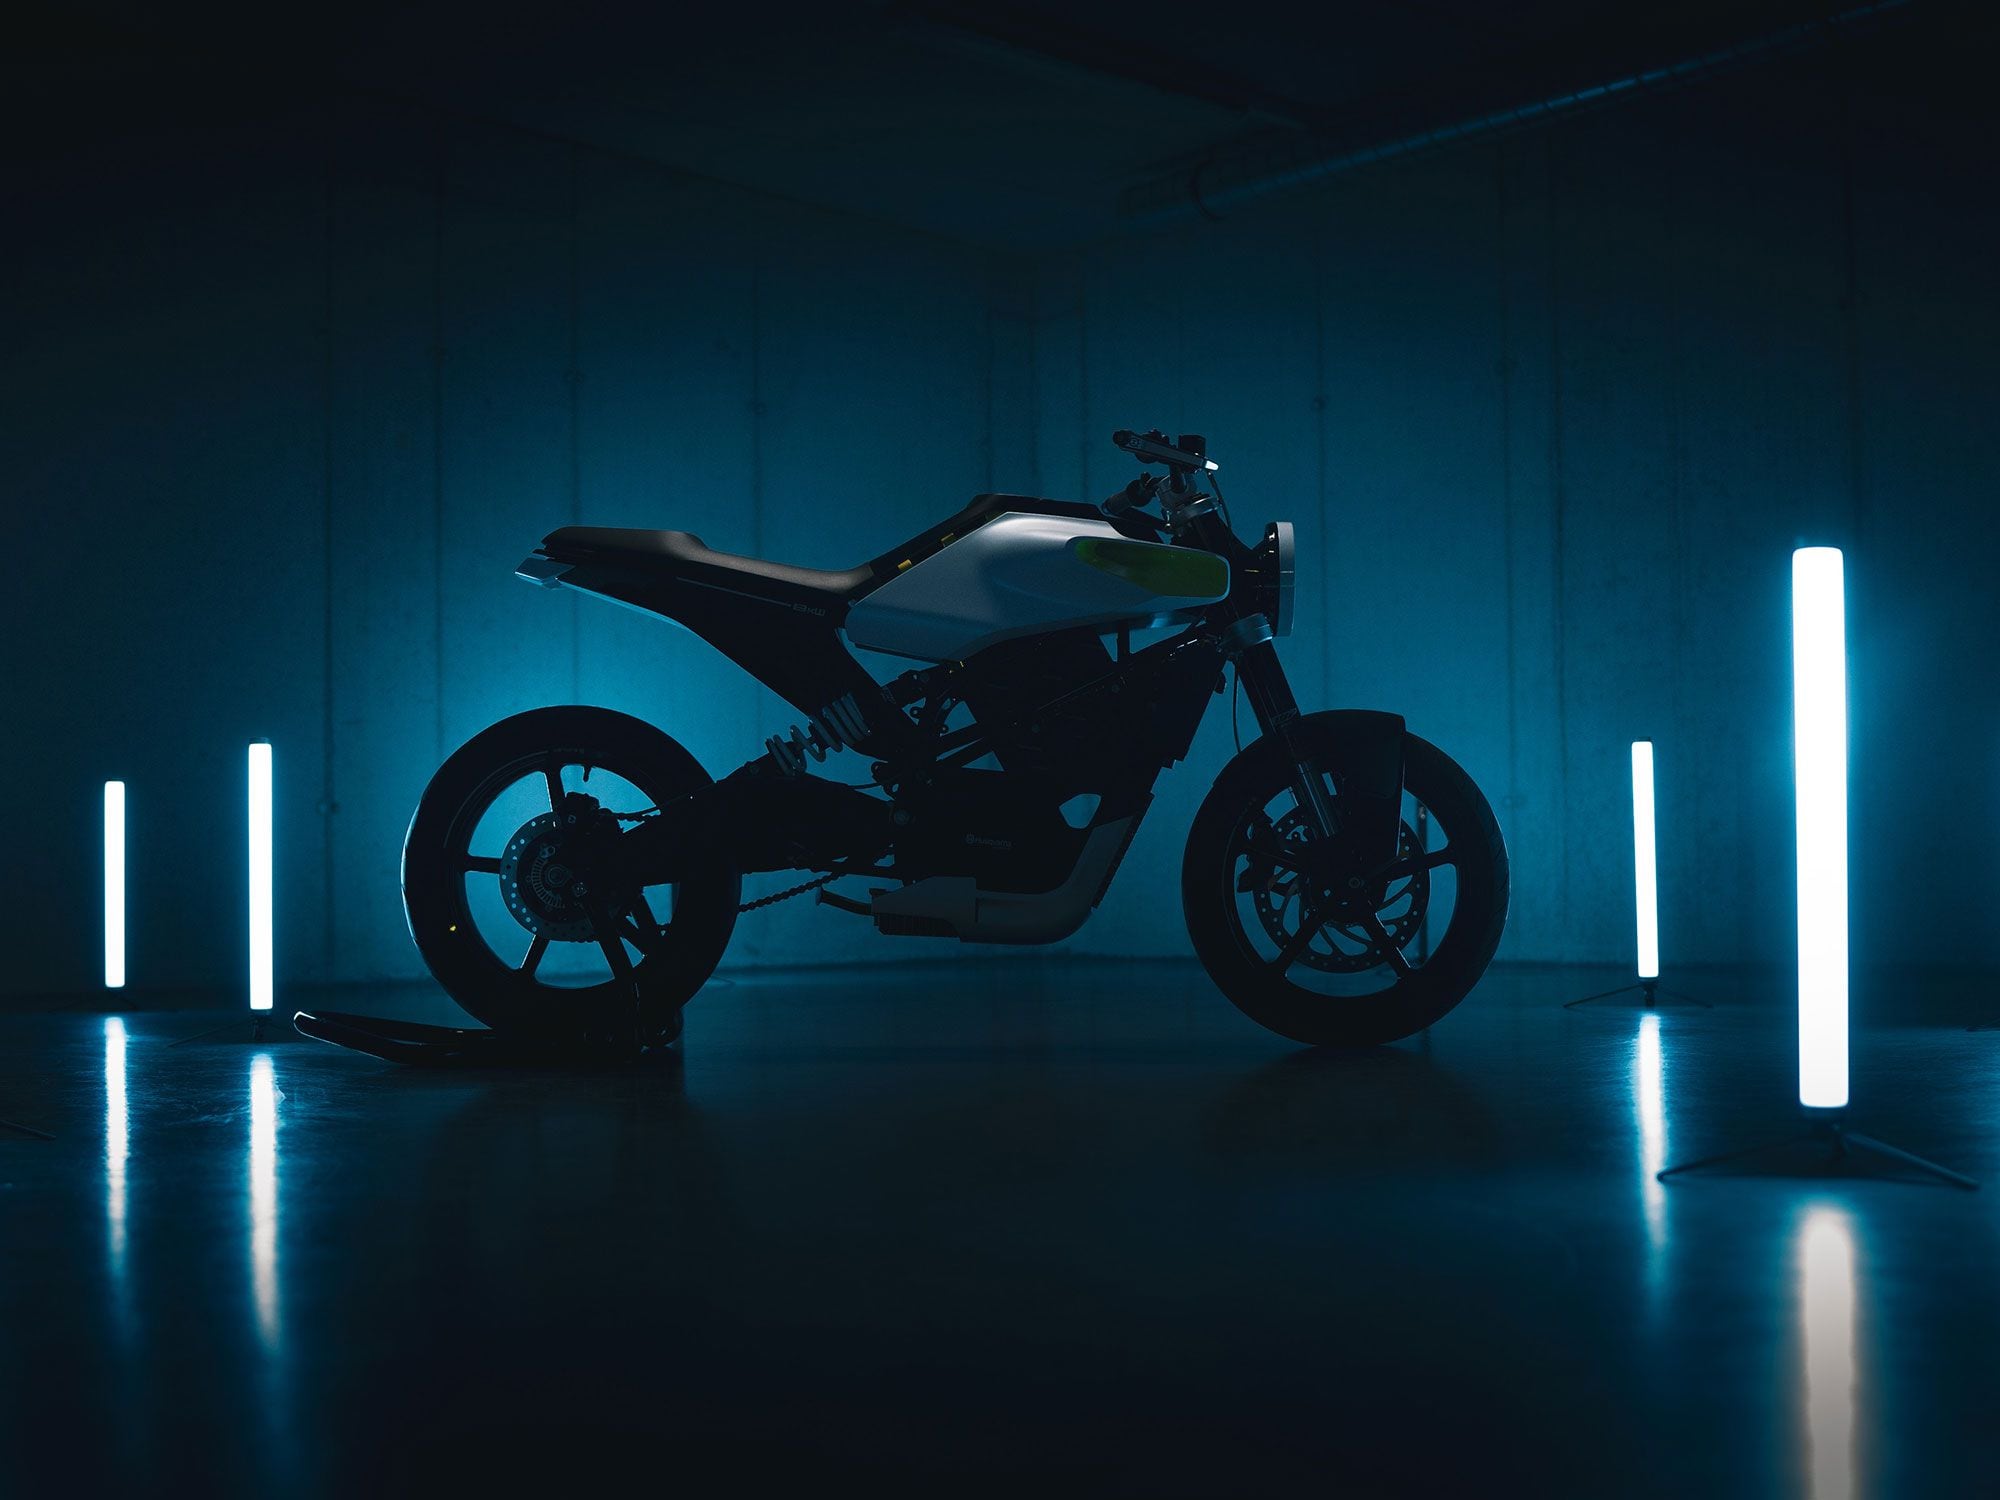 The Husqvarna E-Pilen electric motorcycle concept takes its styling from the brand’s other road bikes, the Vitpilen and Svartpilen.